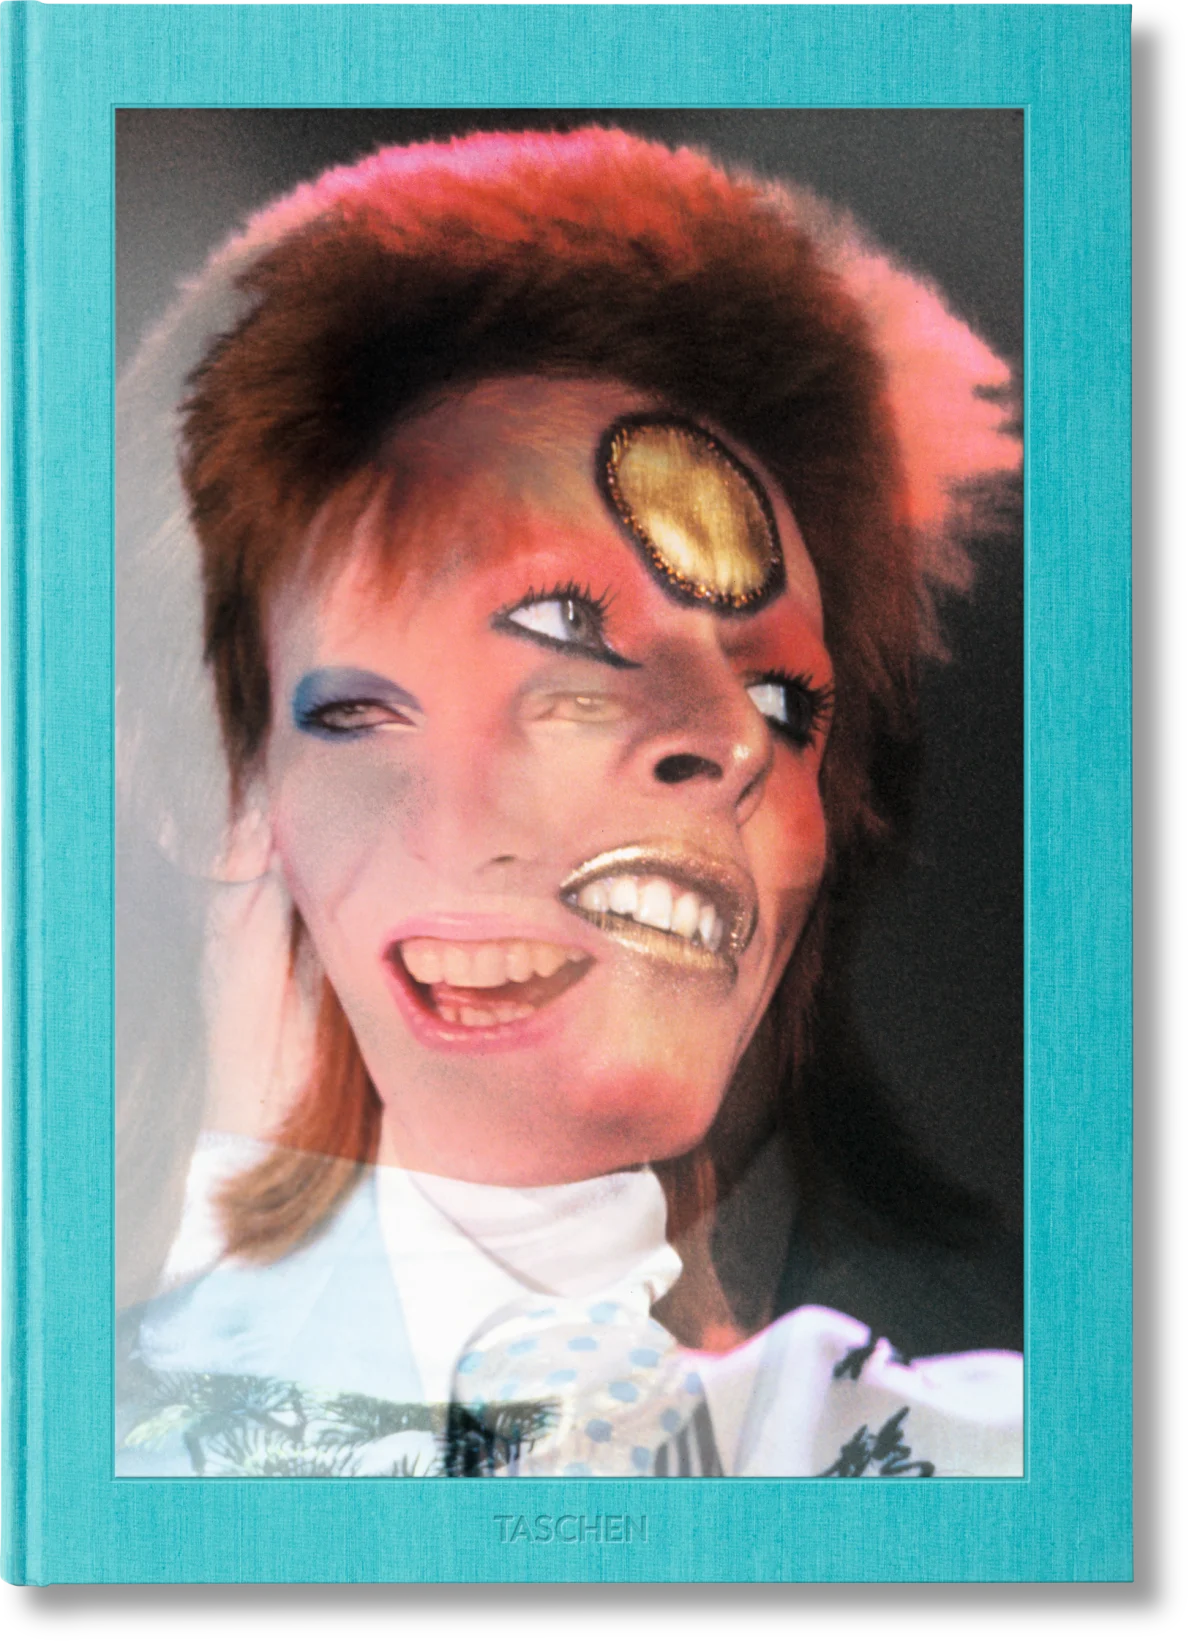 Mick Rock. The Rise of David Bowie, 1972-1973